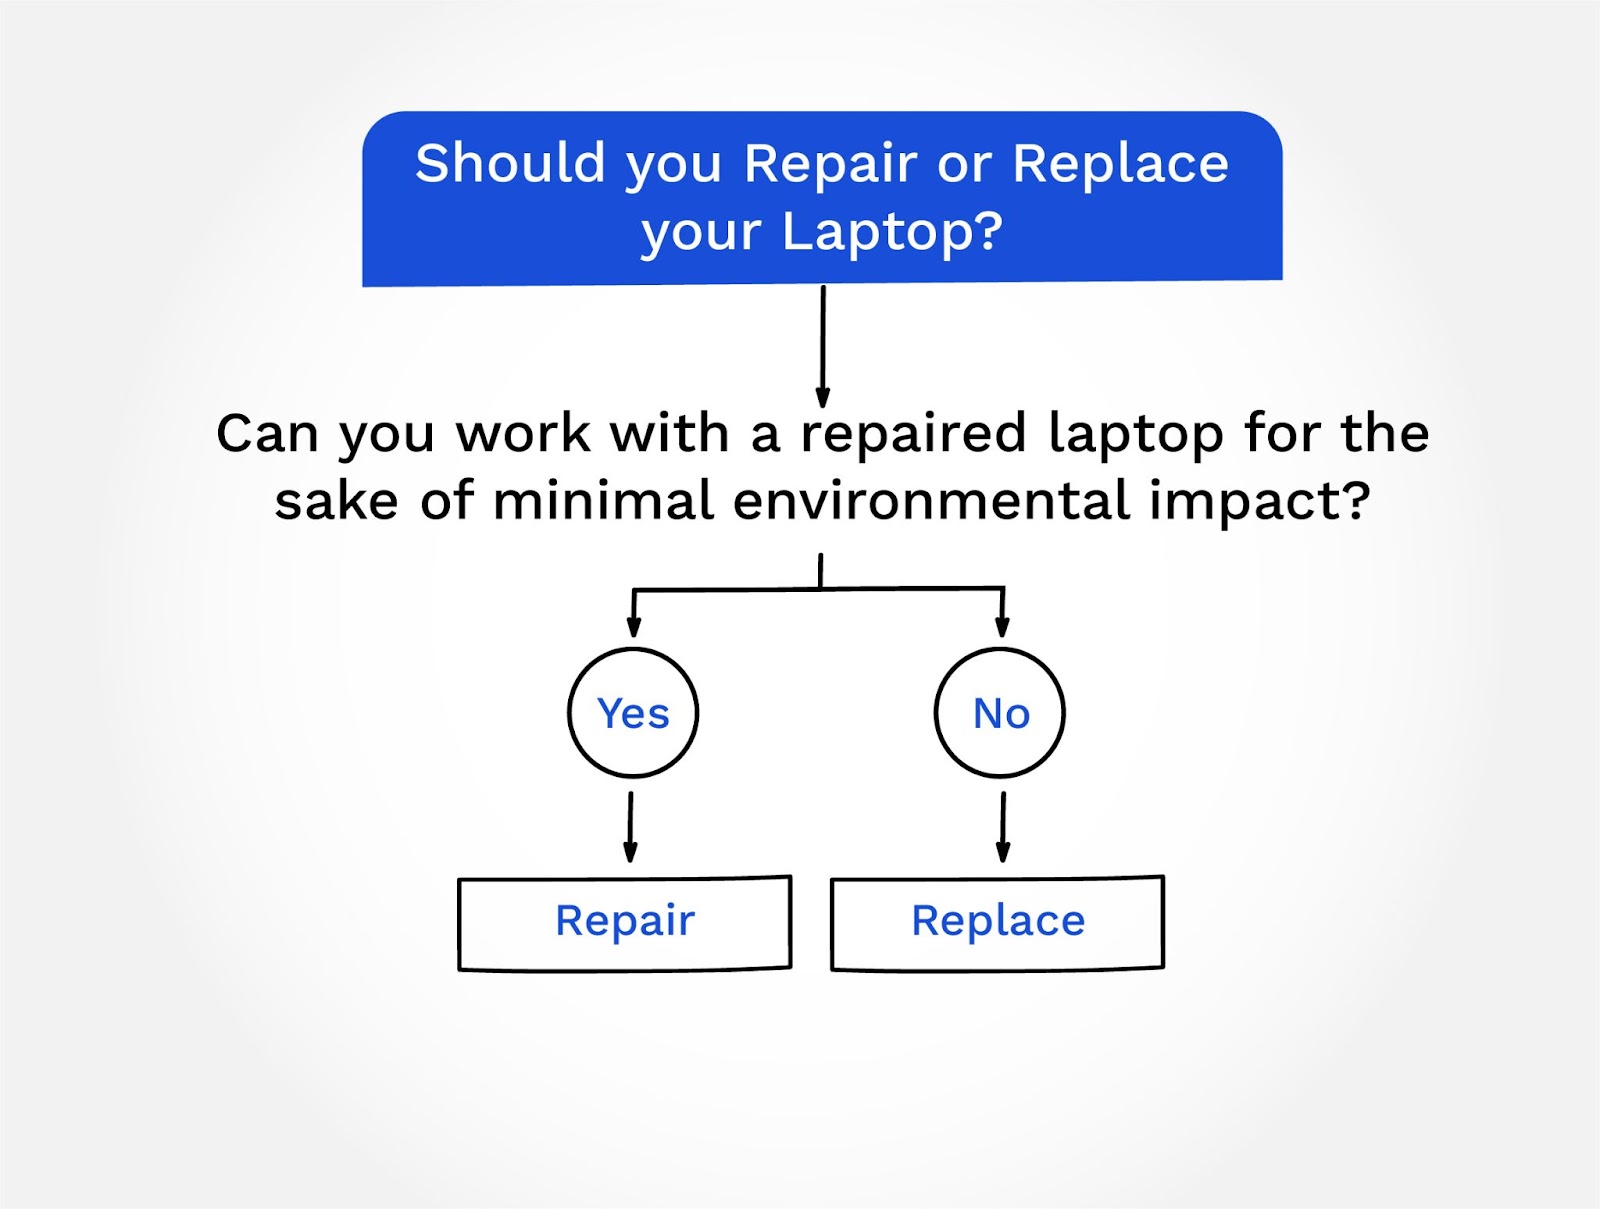 Can You Work With a Repaired Laptop For The Sake of Minimal Enviromental Impact?